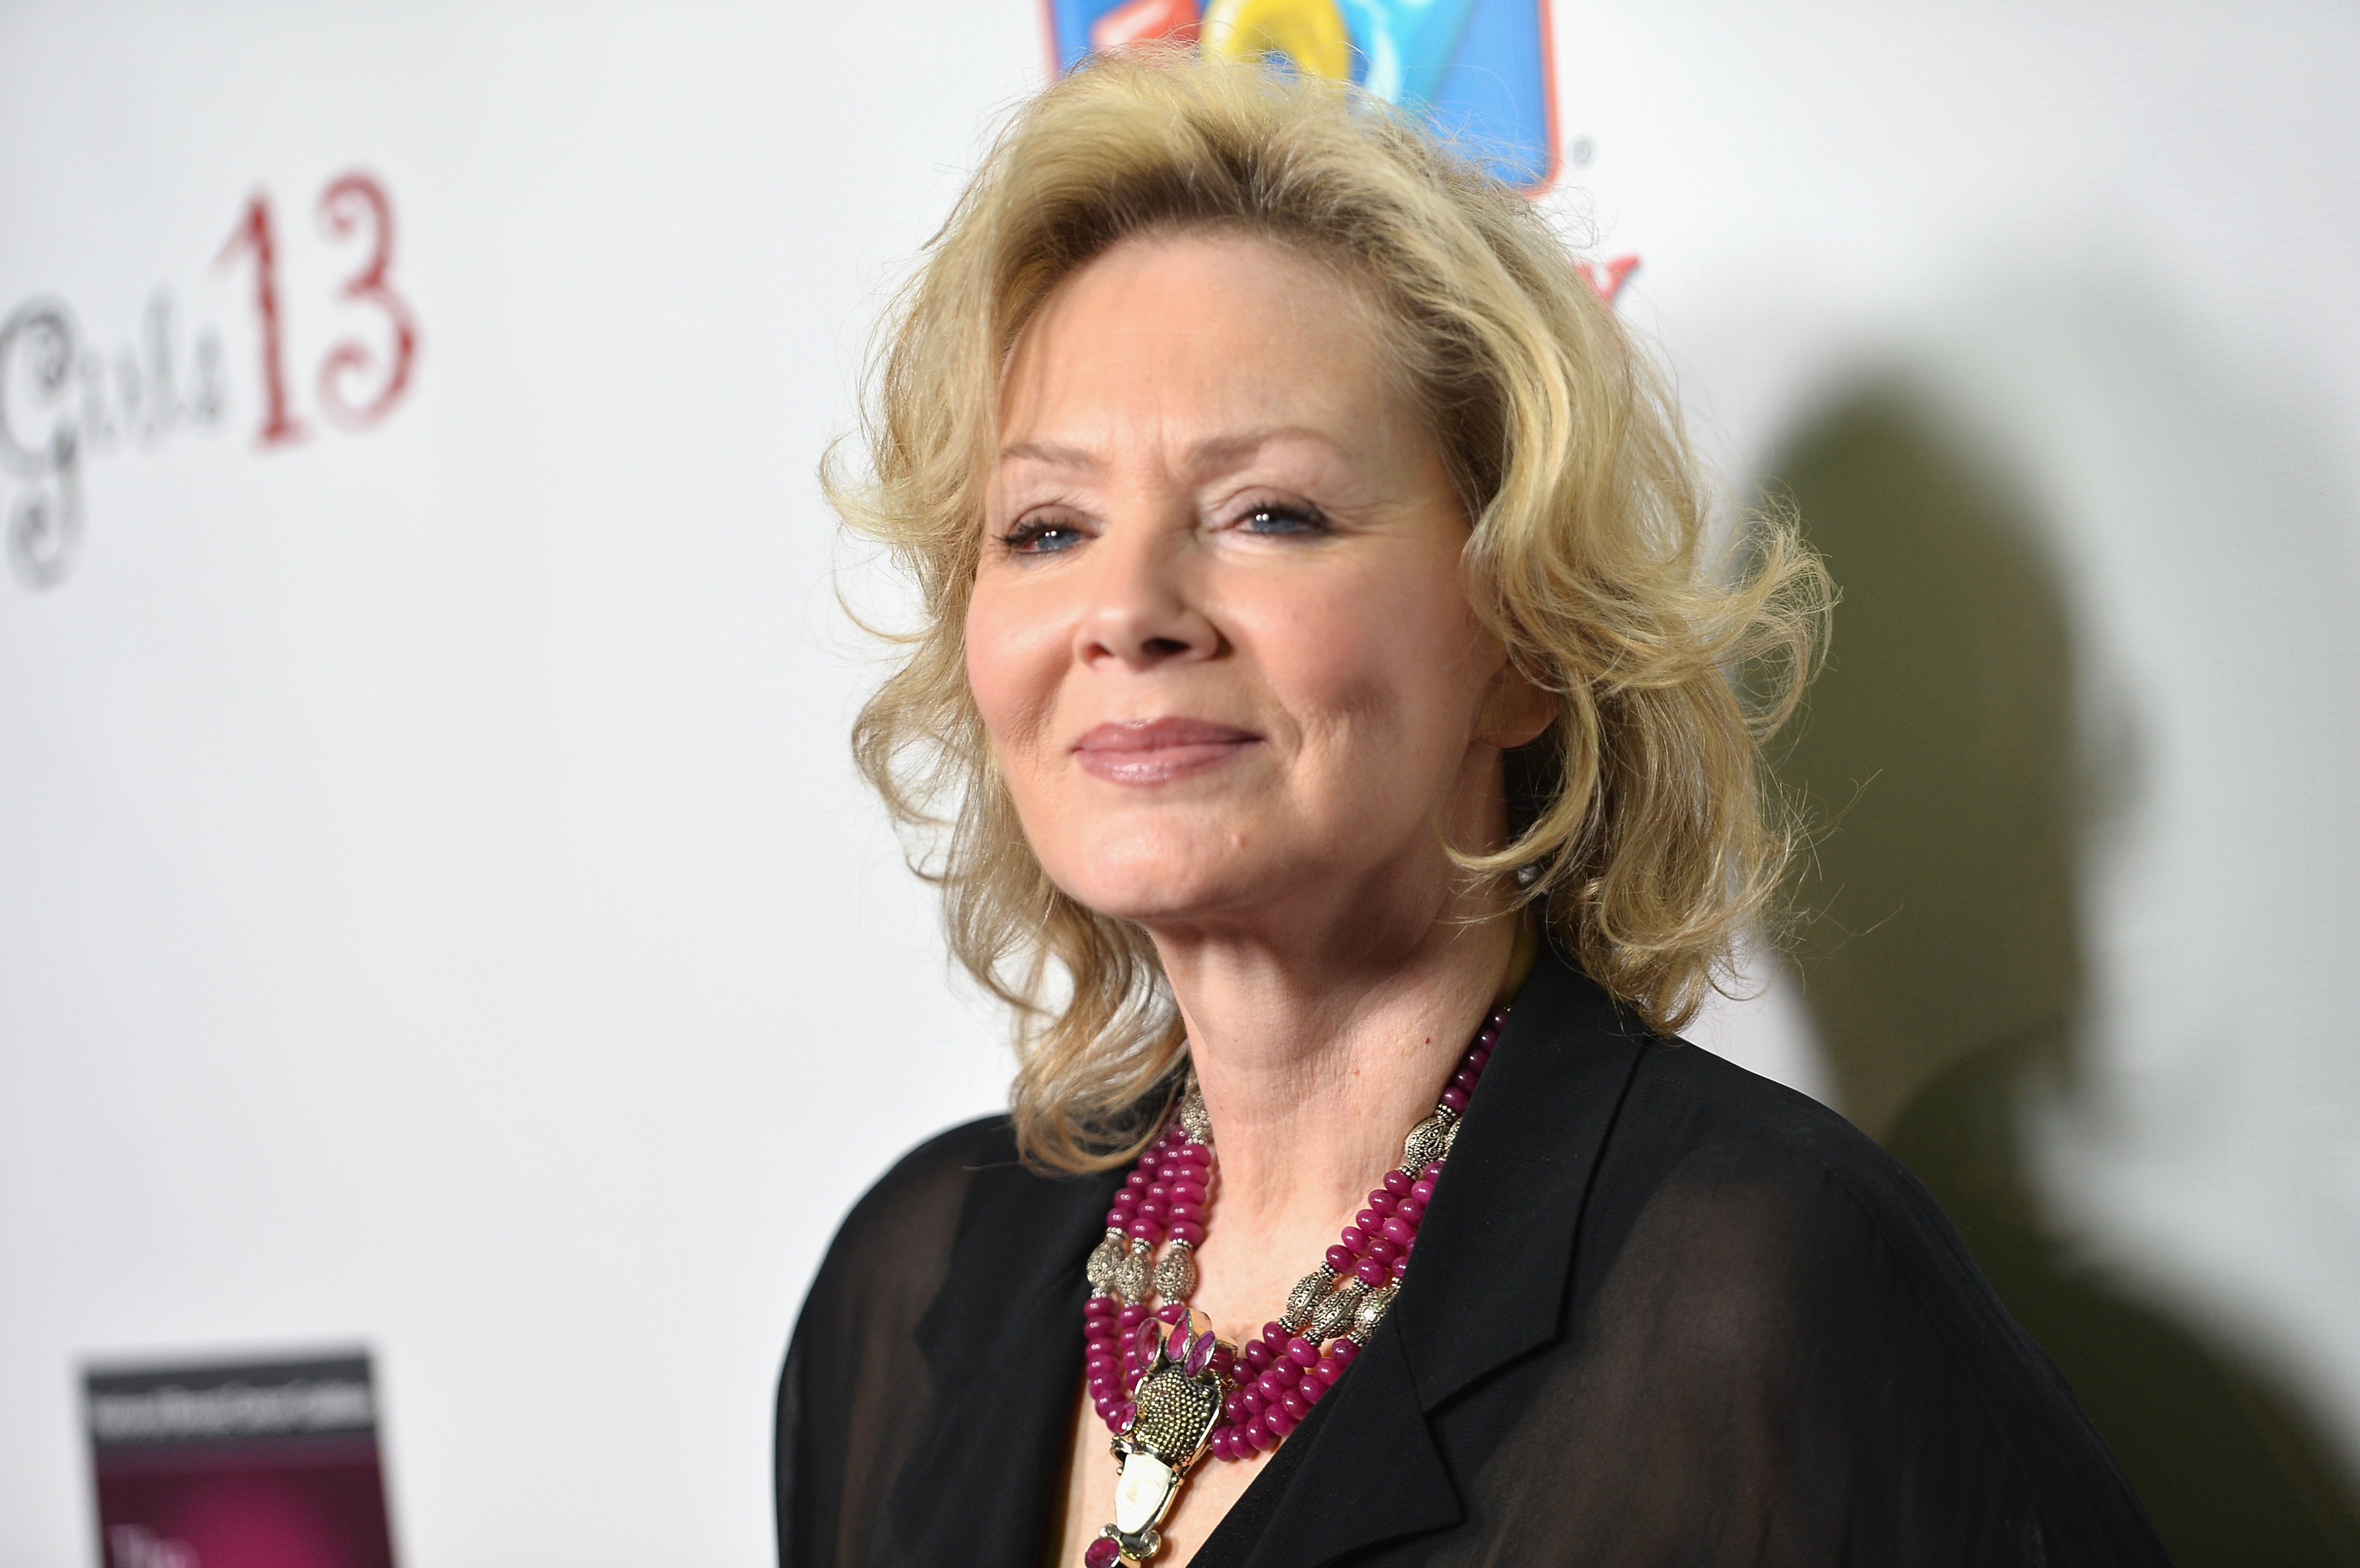 Jean Smart attends The National Breast Cancer Coalition Fund's 13th Annual Les Girls at the Avalon on October 7, 2013 in Hollywood, California. | Source: Getty Images